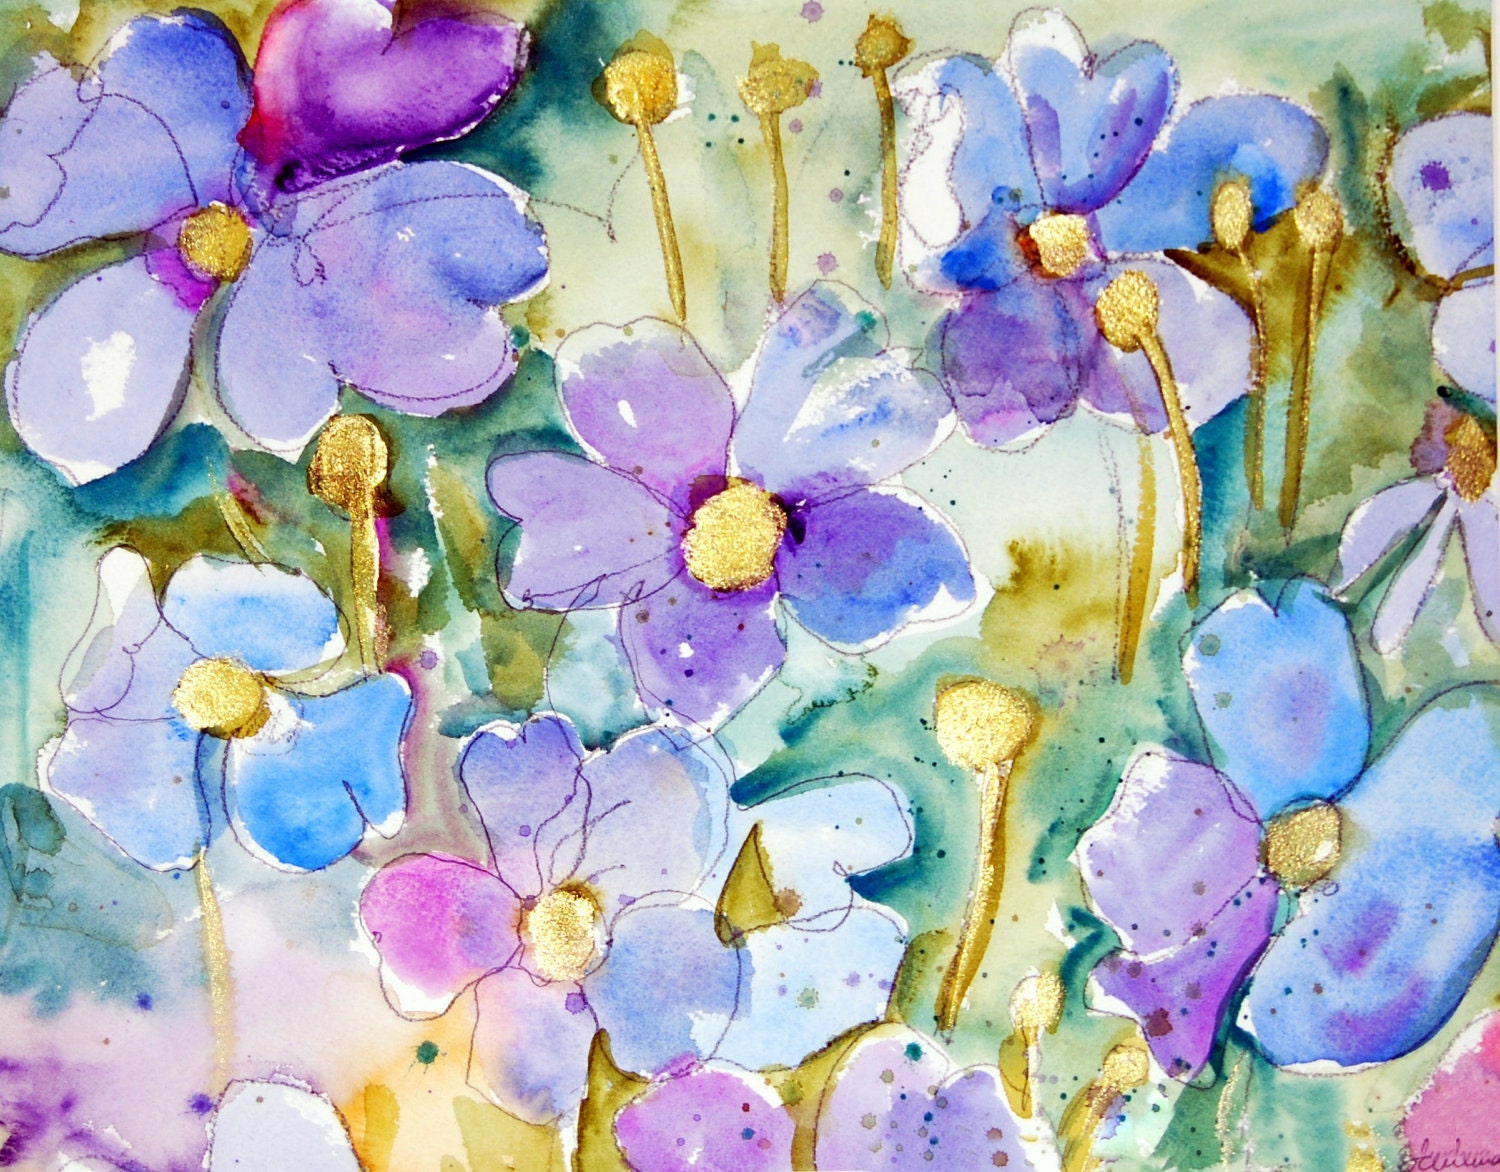 Floral Painting 16x20" with FREE mat, phlox purple Flowers, gold shimmer, deep teal